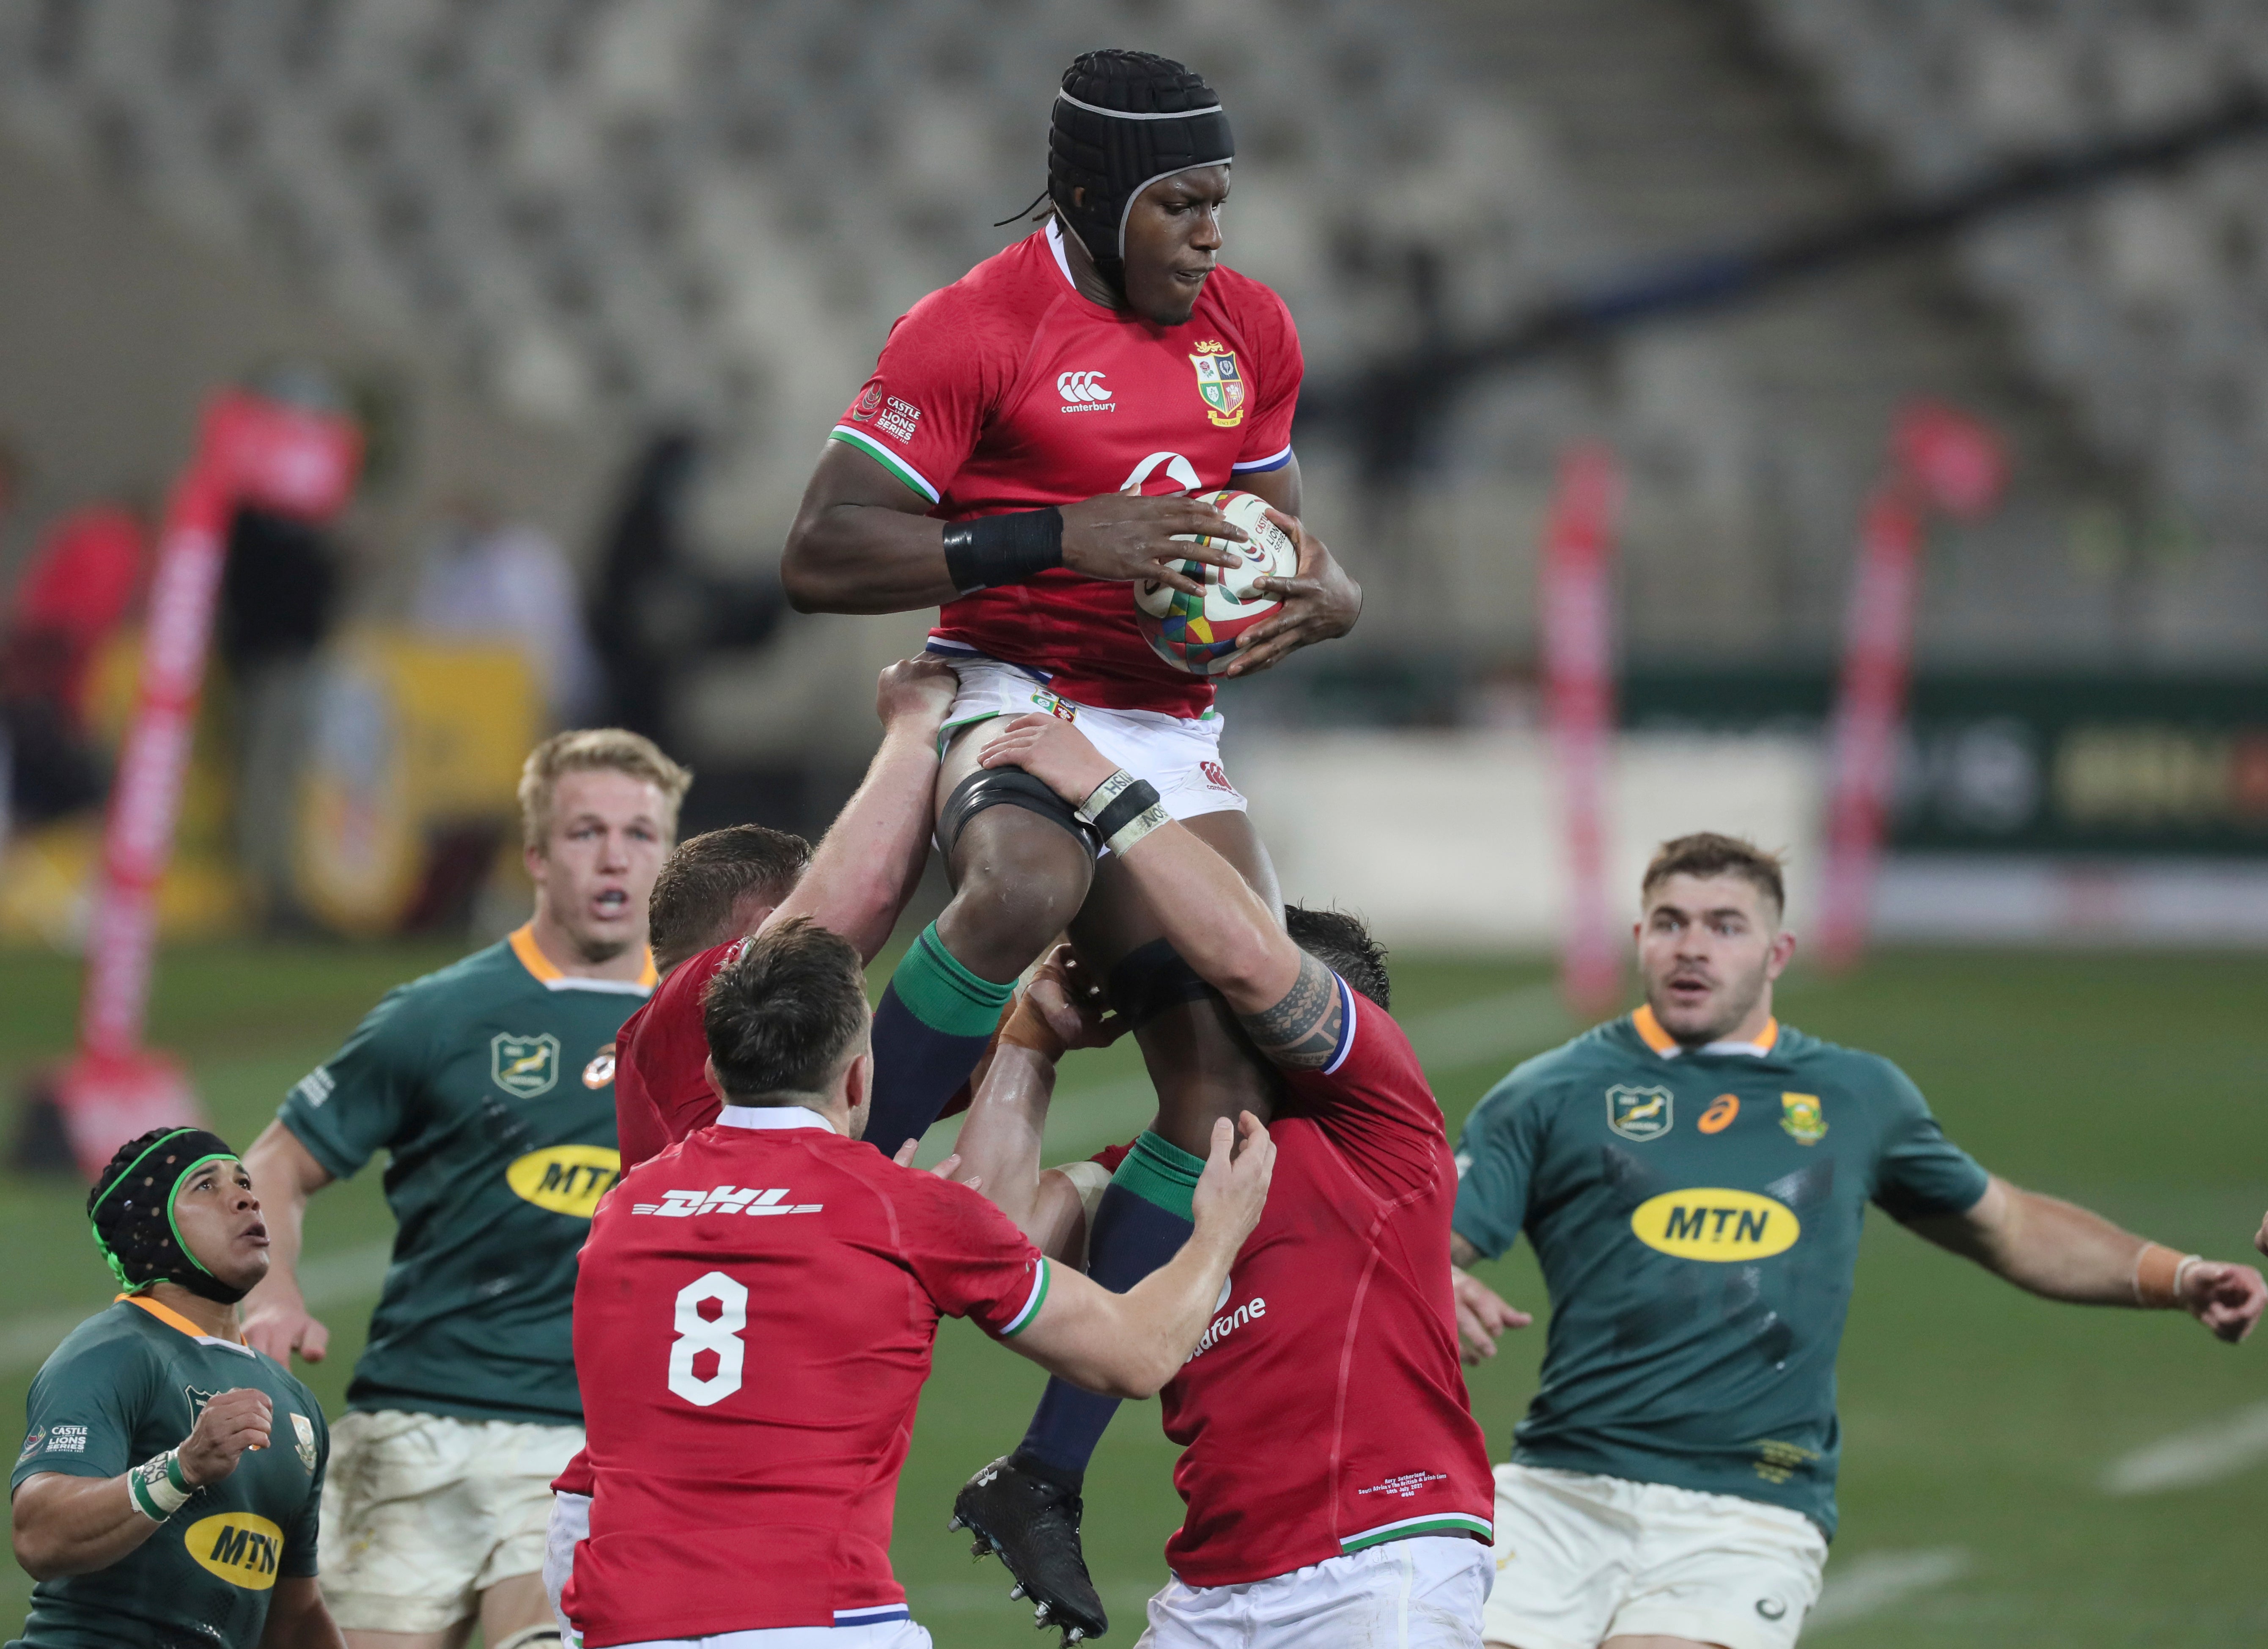 Maro Itoje climbs to take the ball during the British and Irish Lions’ first Test victory over South Africa (Halden Krog/AP/PA)